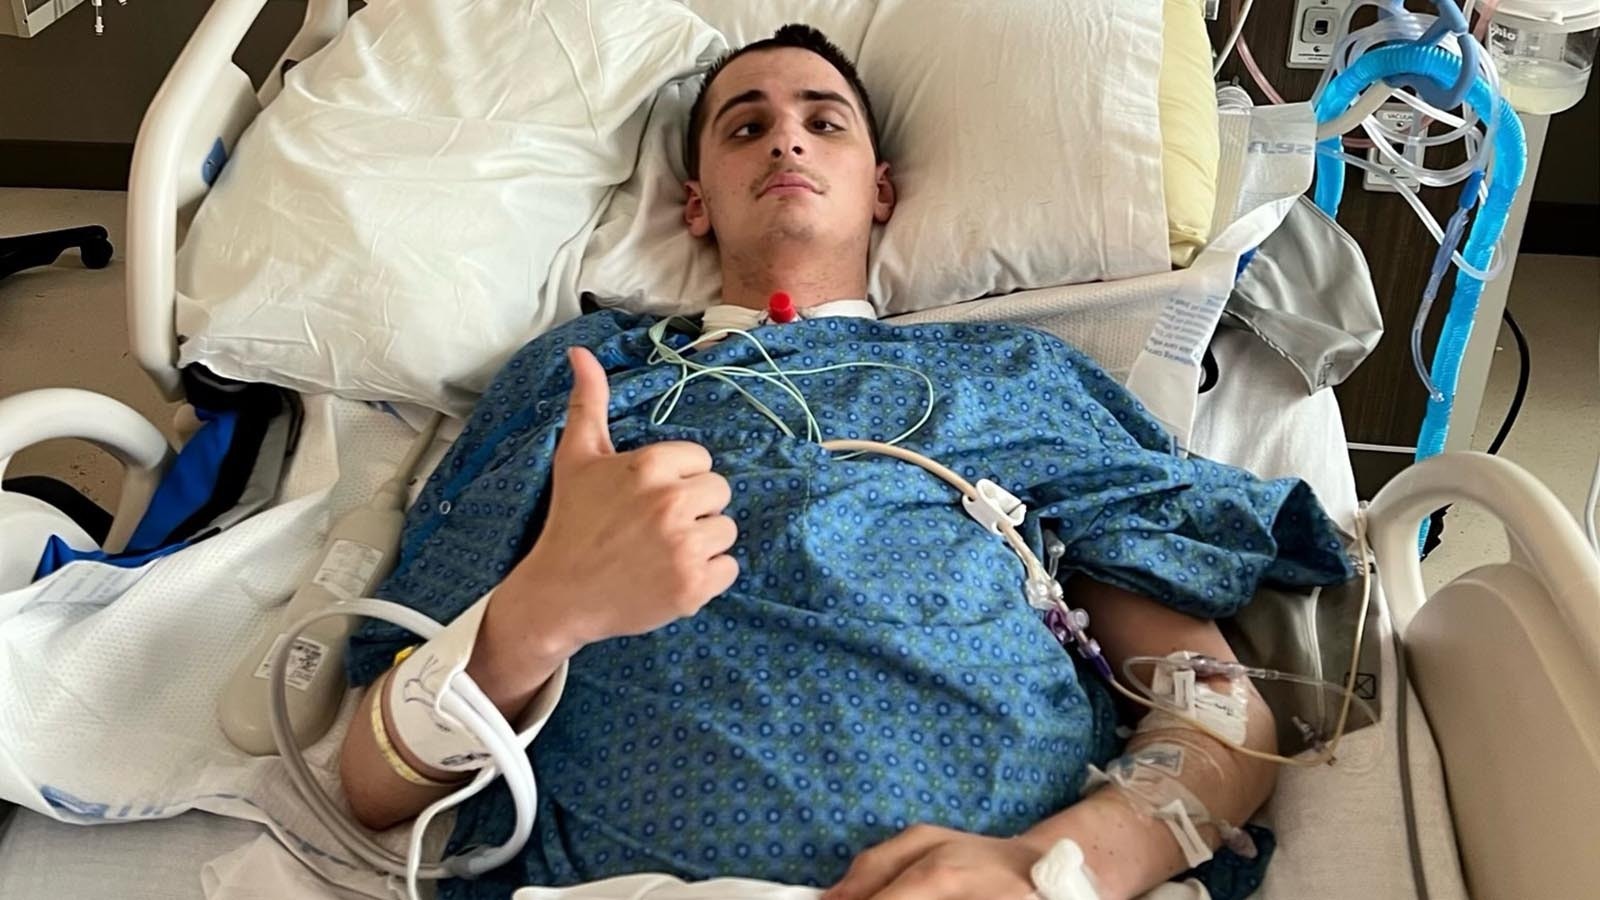 Despite the physical setbacks he suffered as a result of a crash, Gavan Bethel continues to be optimistic and has made tremendous progress in his recovery.